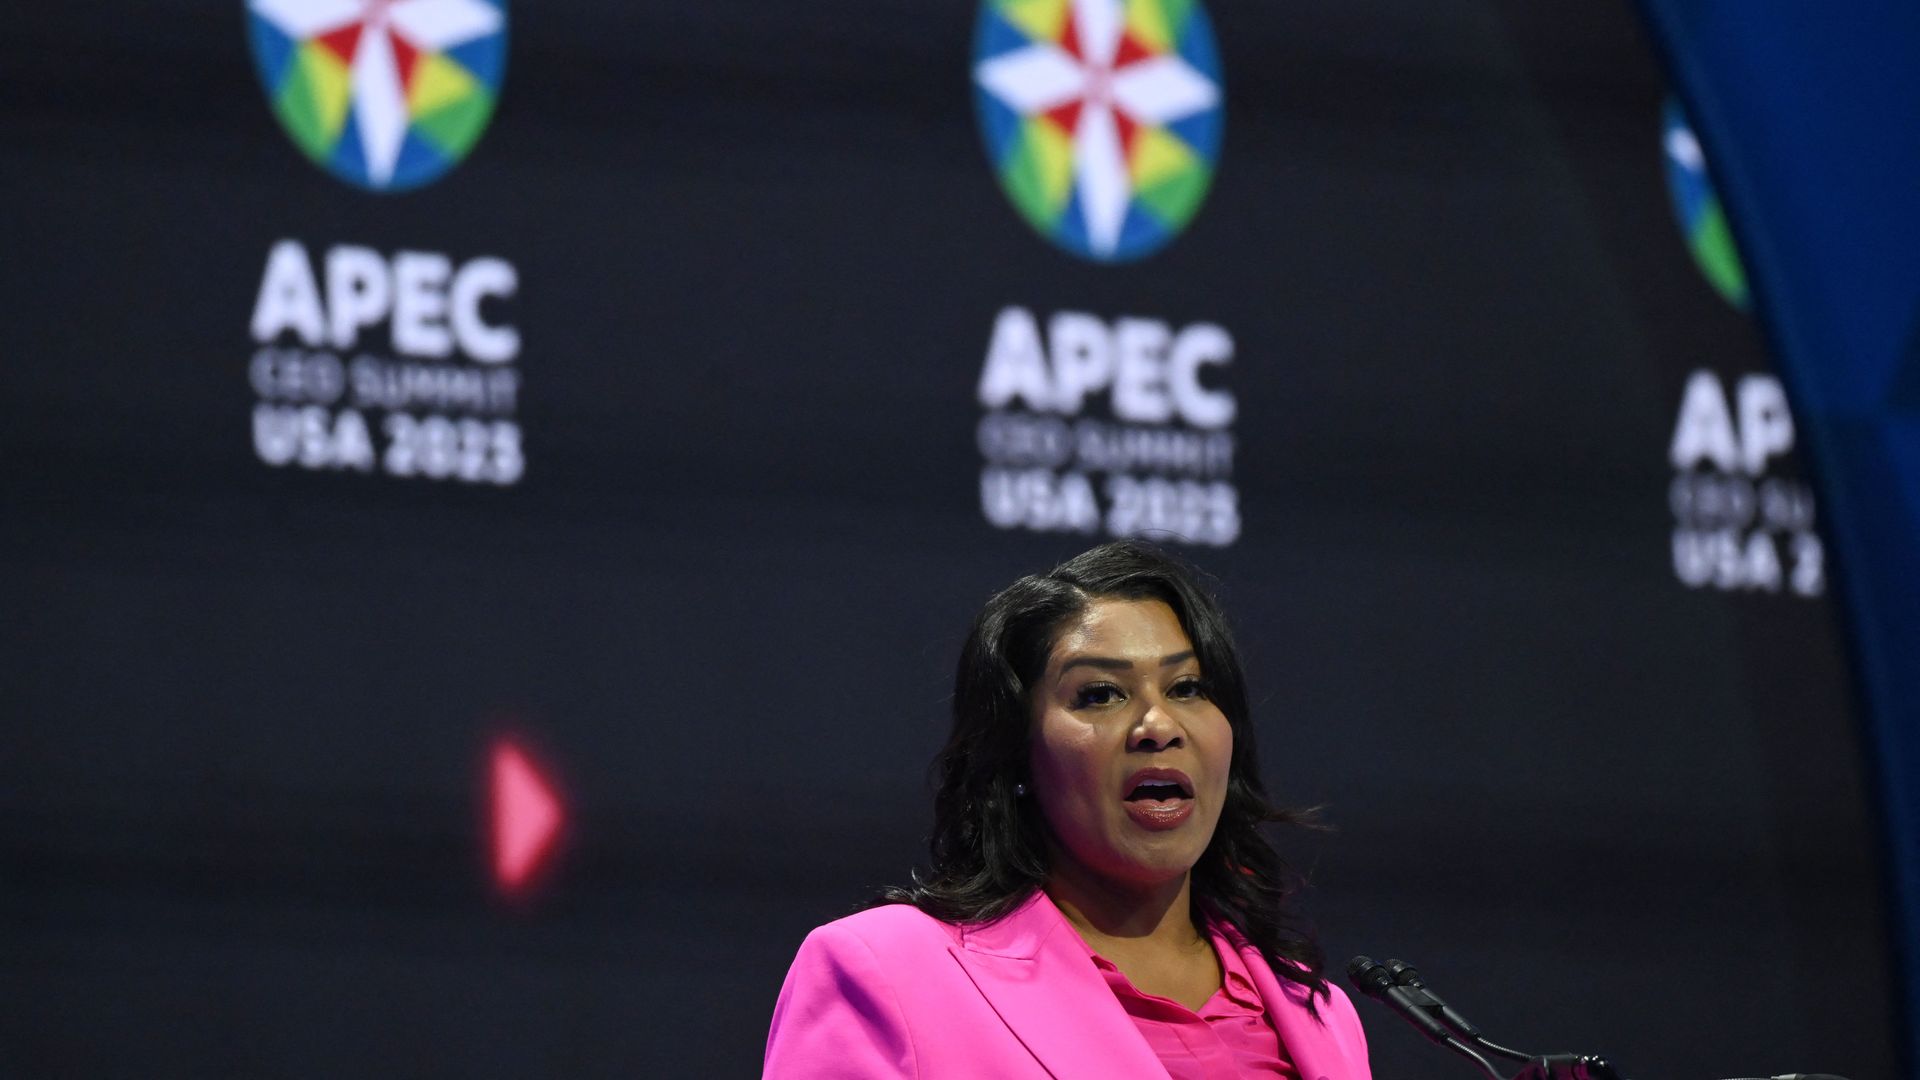 Photo of London Breed speaking on the APEC stage